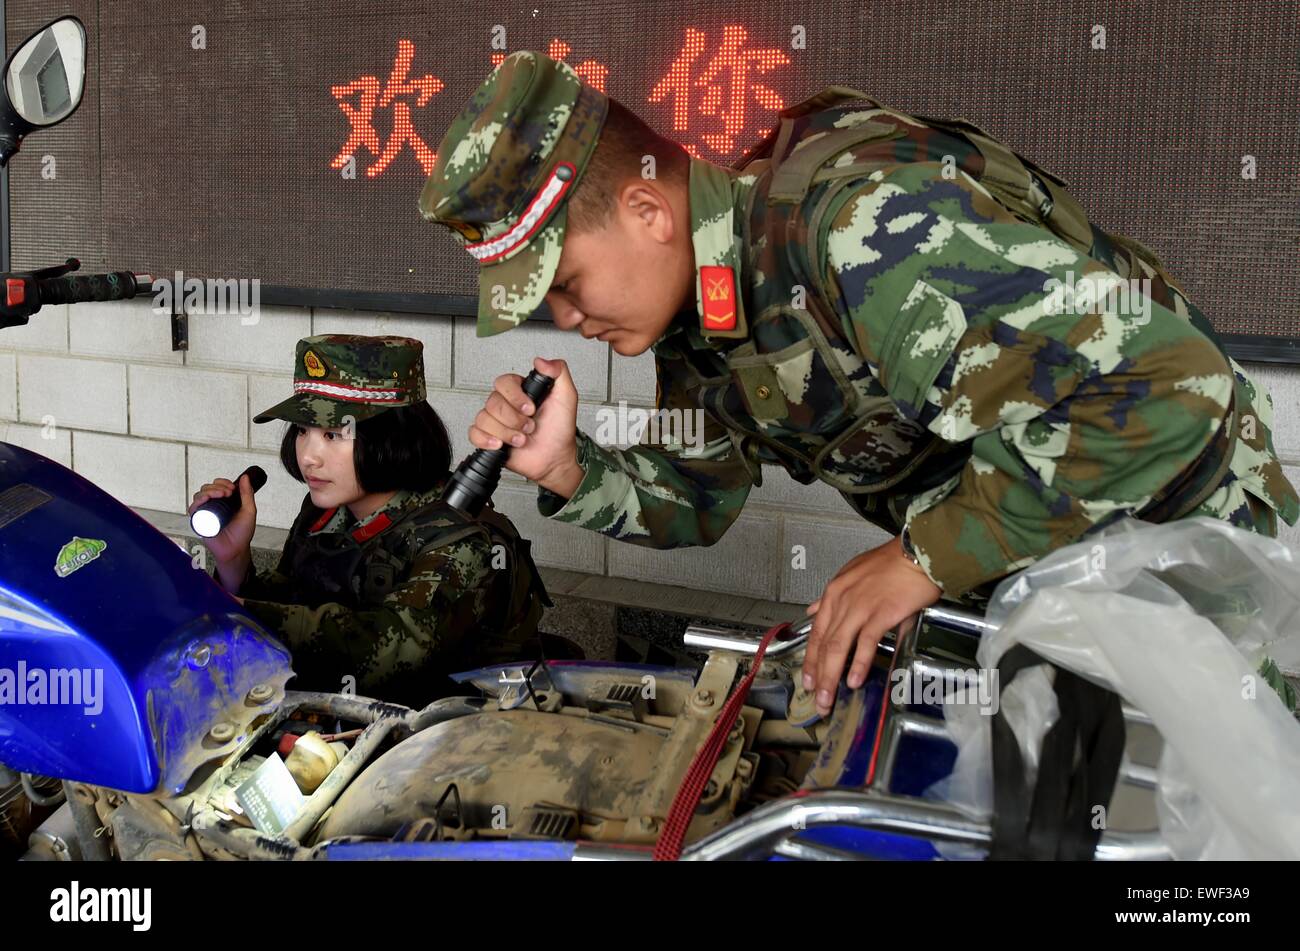 (150625) -- DEHONG, June 25, 2015 (Xinhua) -- Zhang Liu (L) and her comrade check a refitted motorcycle for contraband at the border checkpoint of Mukang in Dehong Dai-Jingpo Autonomous Prefecture, southwest China's Yunnan Province, June 24, 2015. Born in 1995, Zhang Liu became an anti-drug soldier in border checkpoint of Mukang in 2013.  Grown up in an affluent family in central China's Hunan Province, Zhang said that being a soldier had always been her dream, which drove her to join the army after graduating from high school. Being a front line anti-drug force, the border checkpoint of Mukan Stock Photo